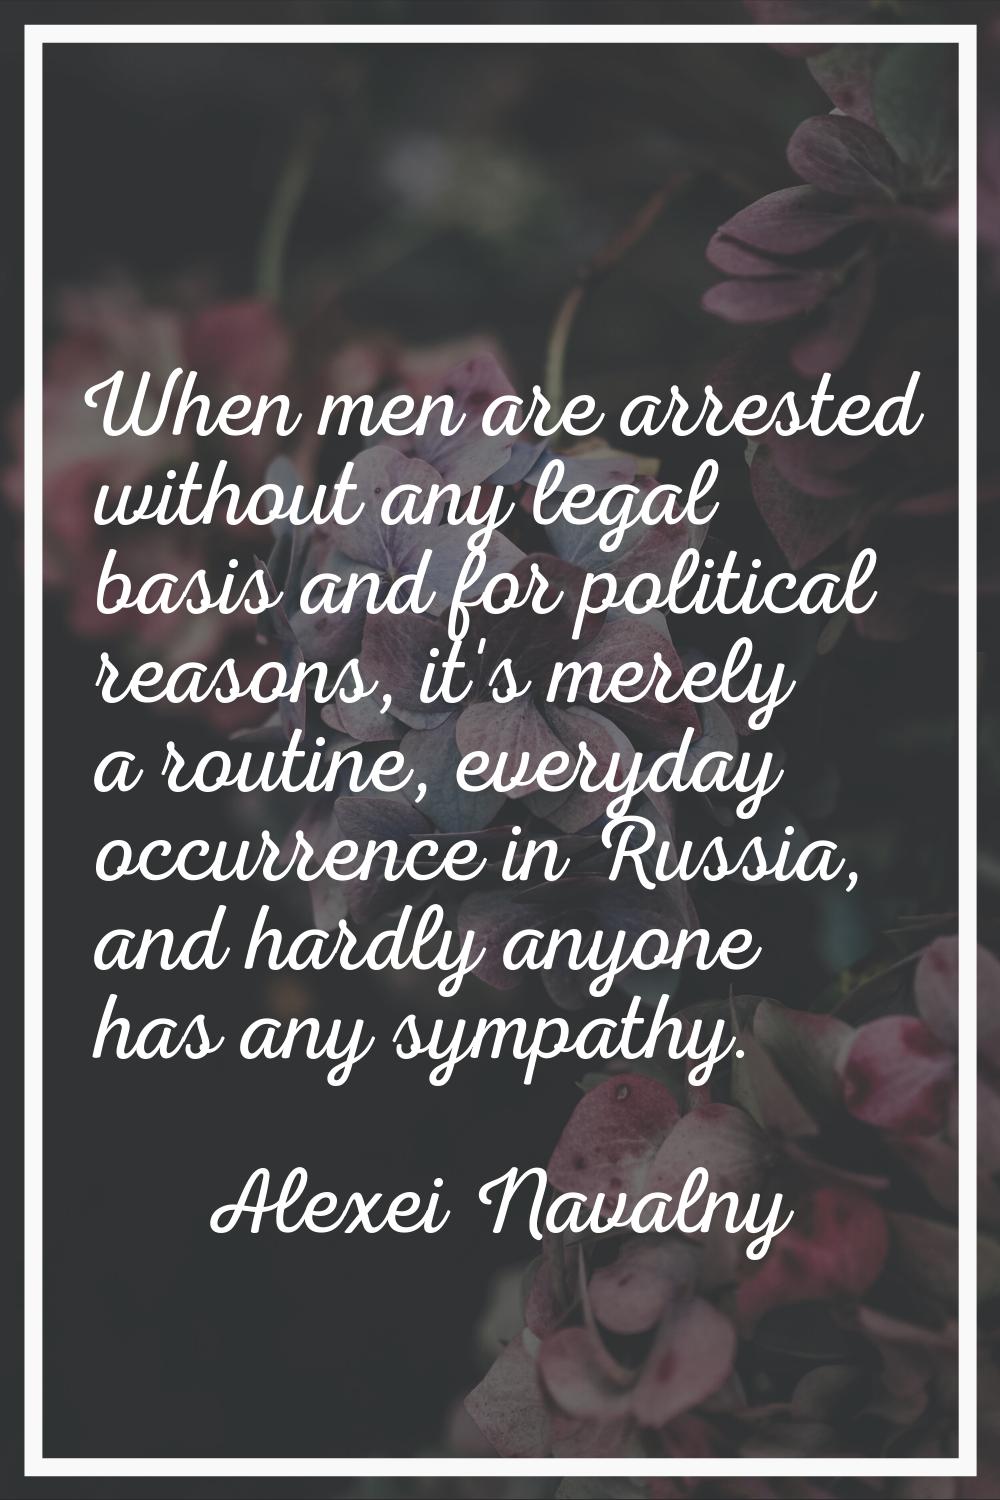 When men are arrested without any legal basis and for political reasons, it's merely a routine, eve